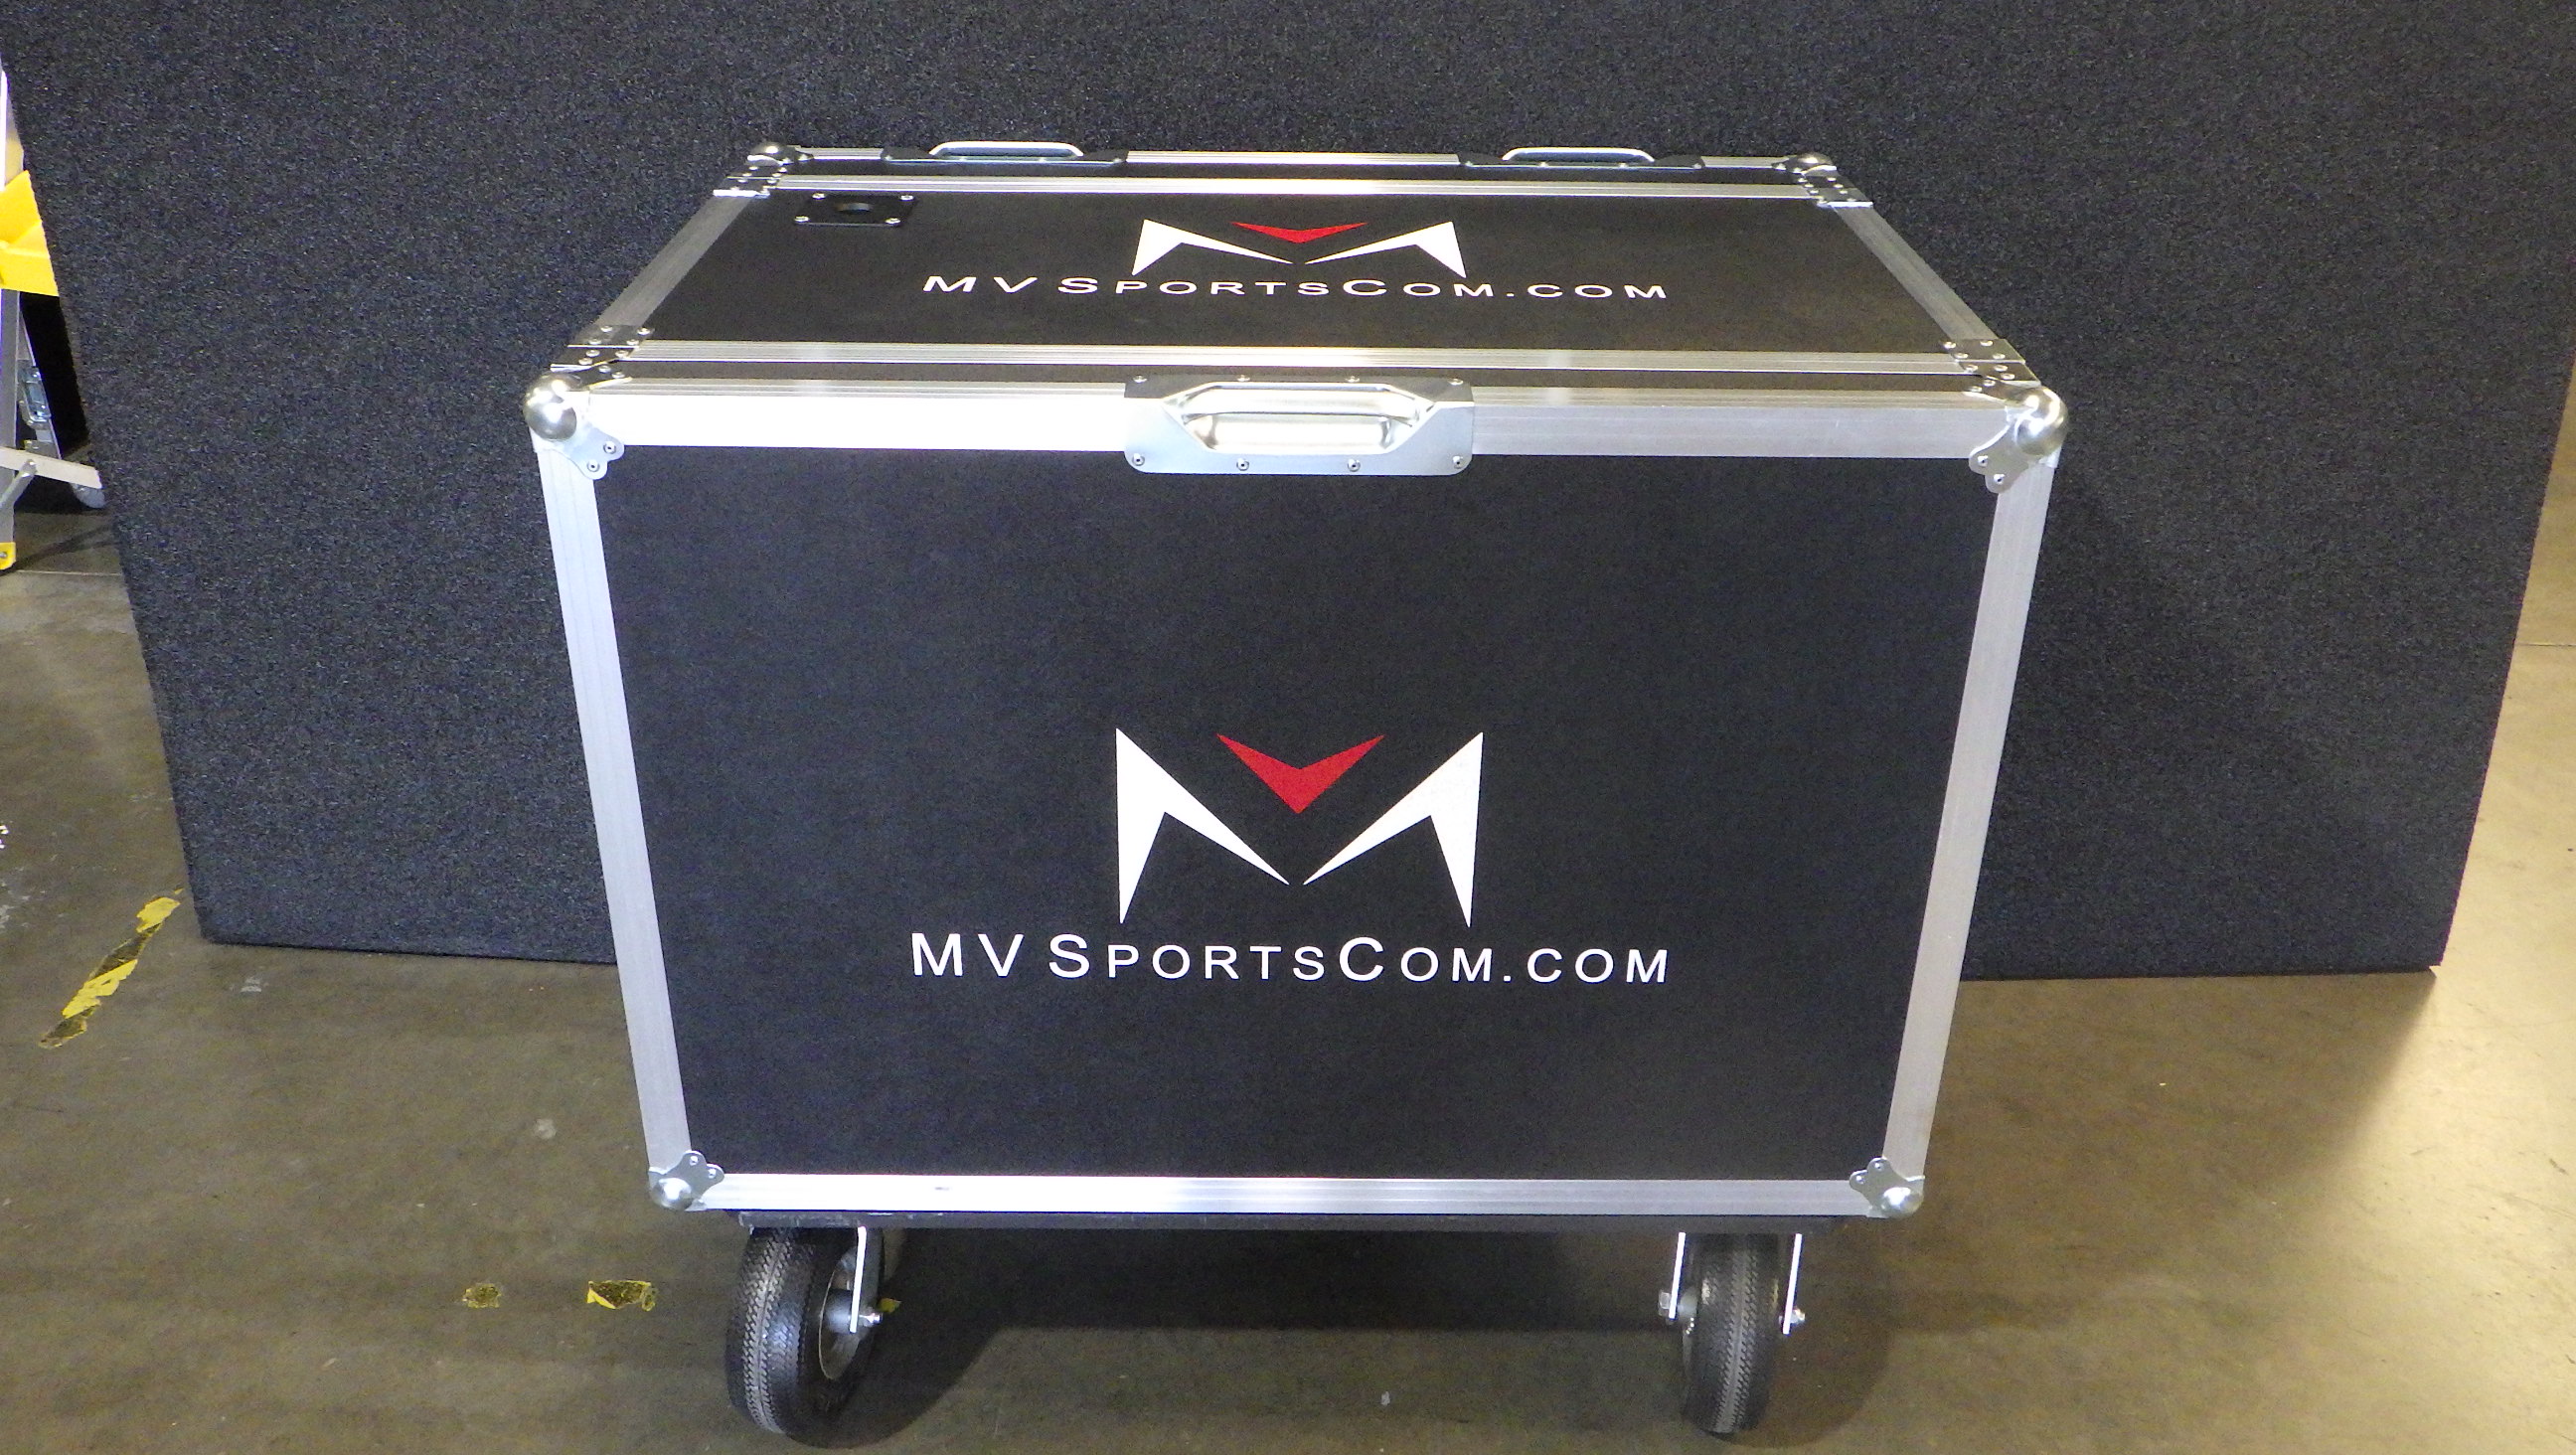 Print # 9519 - Custom 14-RU Double Wide Shock Mount Road Rack with Large Compartmental Storage Lids By Nelson Case Corp